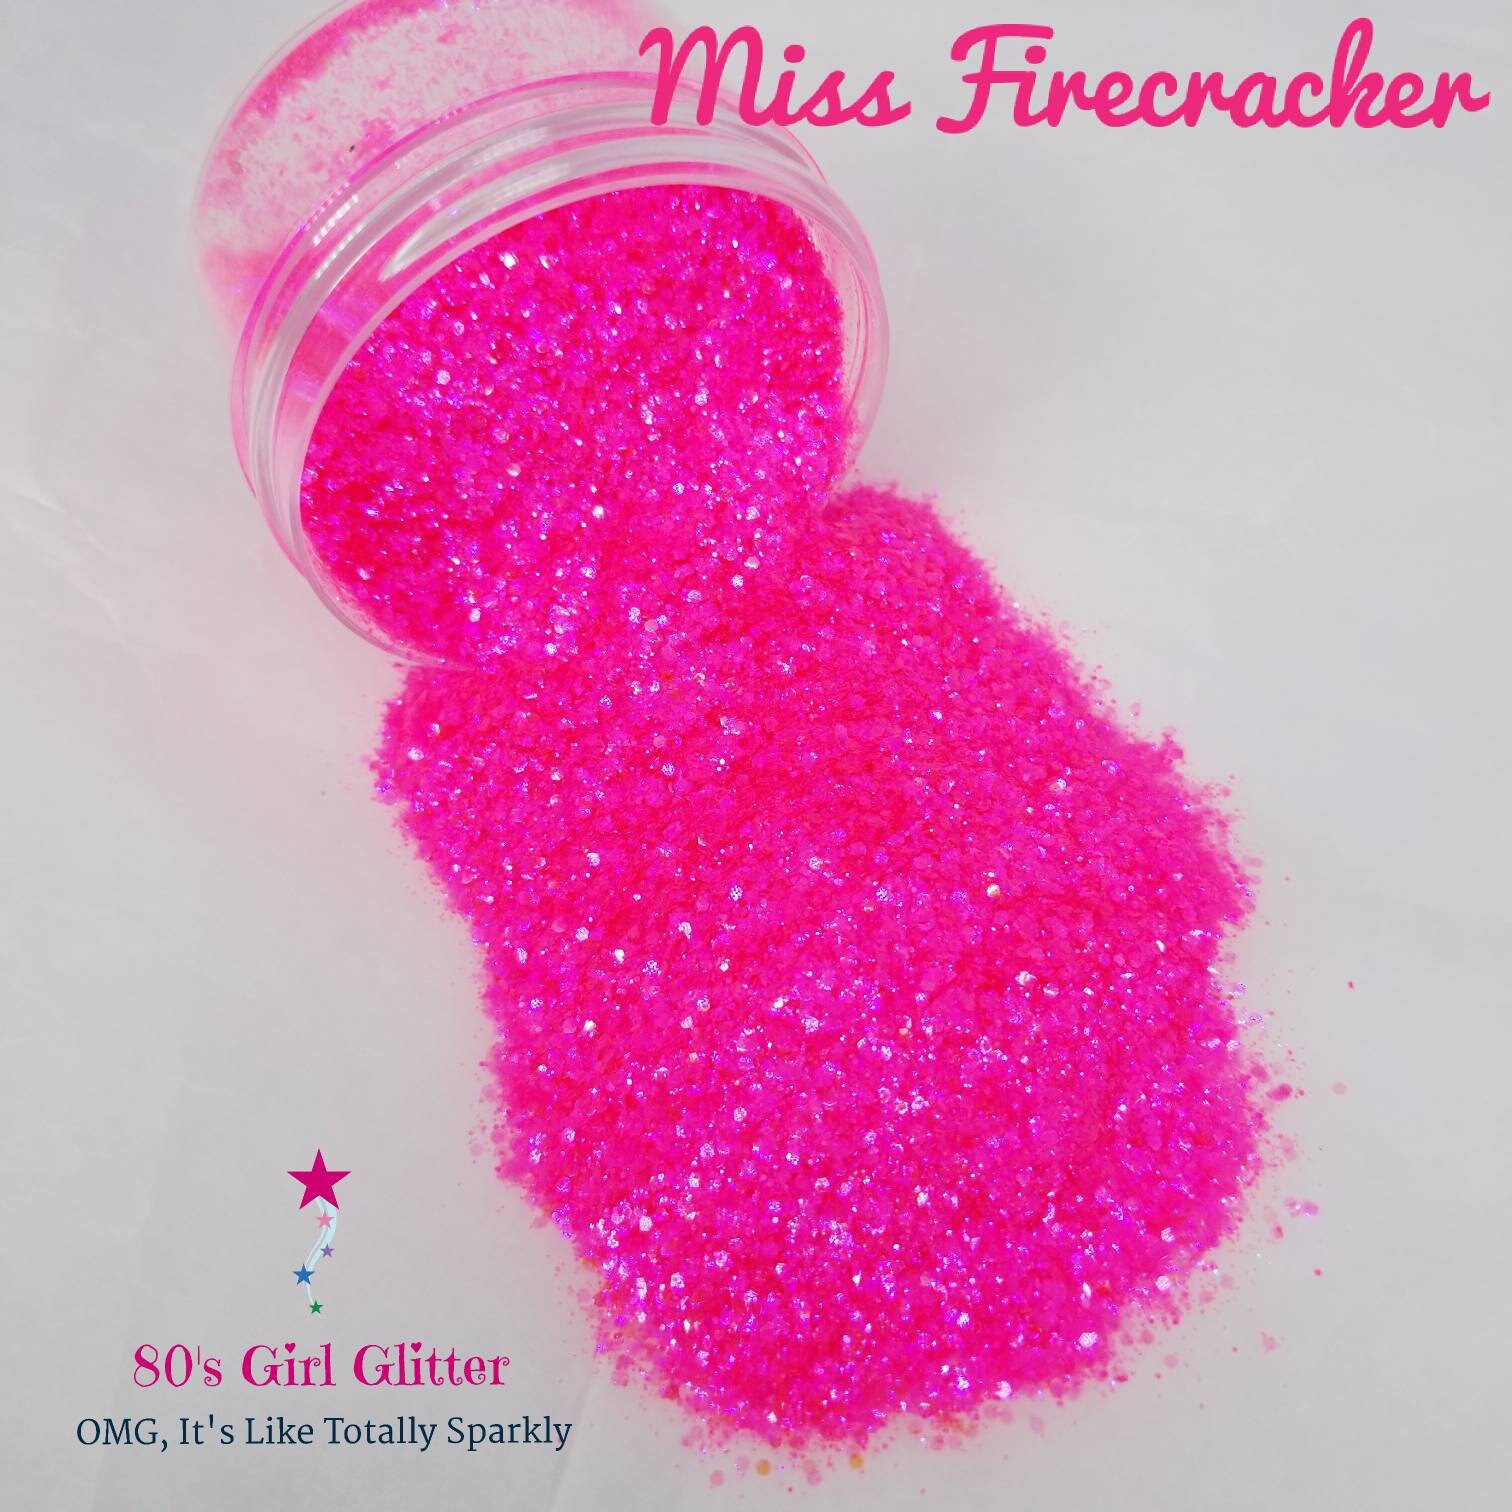 Fine GLITTER 12x12 FLAMING Neon Hot PINK w/tiny black spots applied to  Leather THiCK 5.5oz/2.2 mm PeggySueAlso® E4355-41 Valentines Day